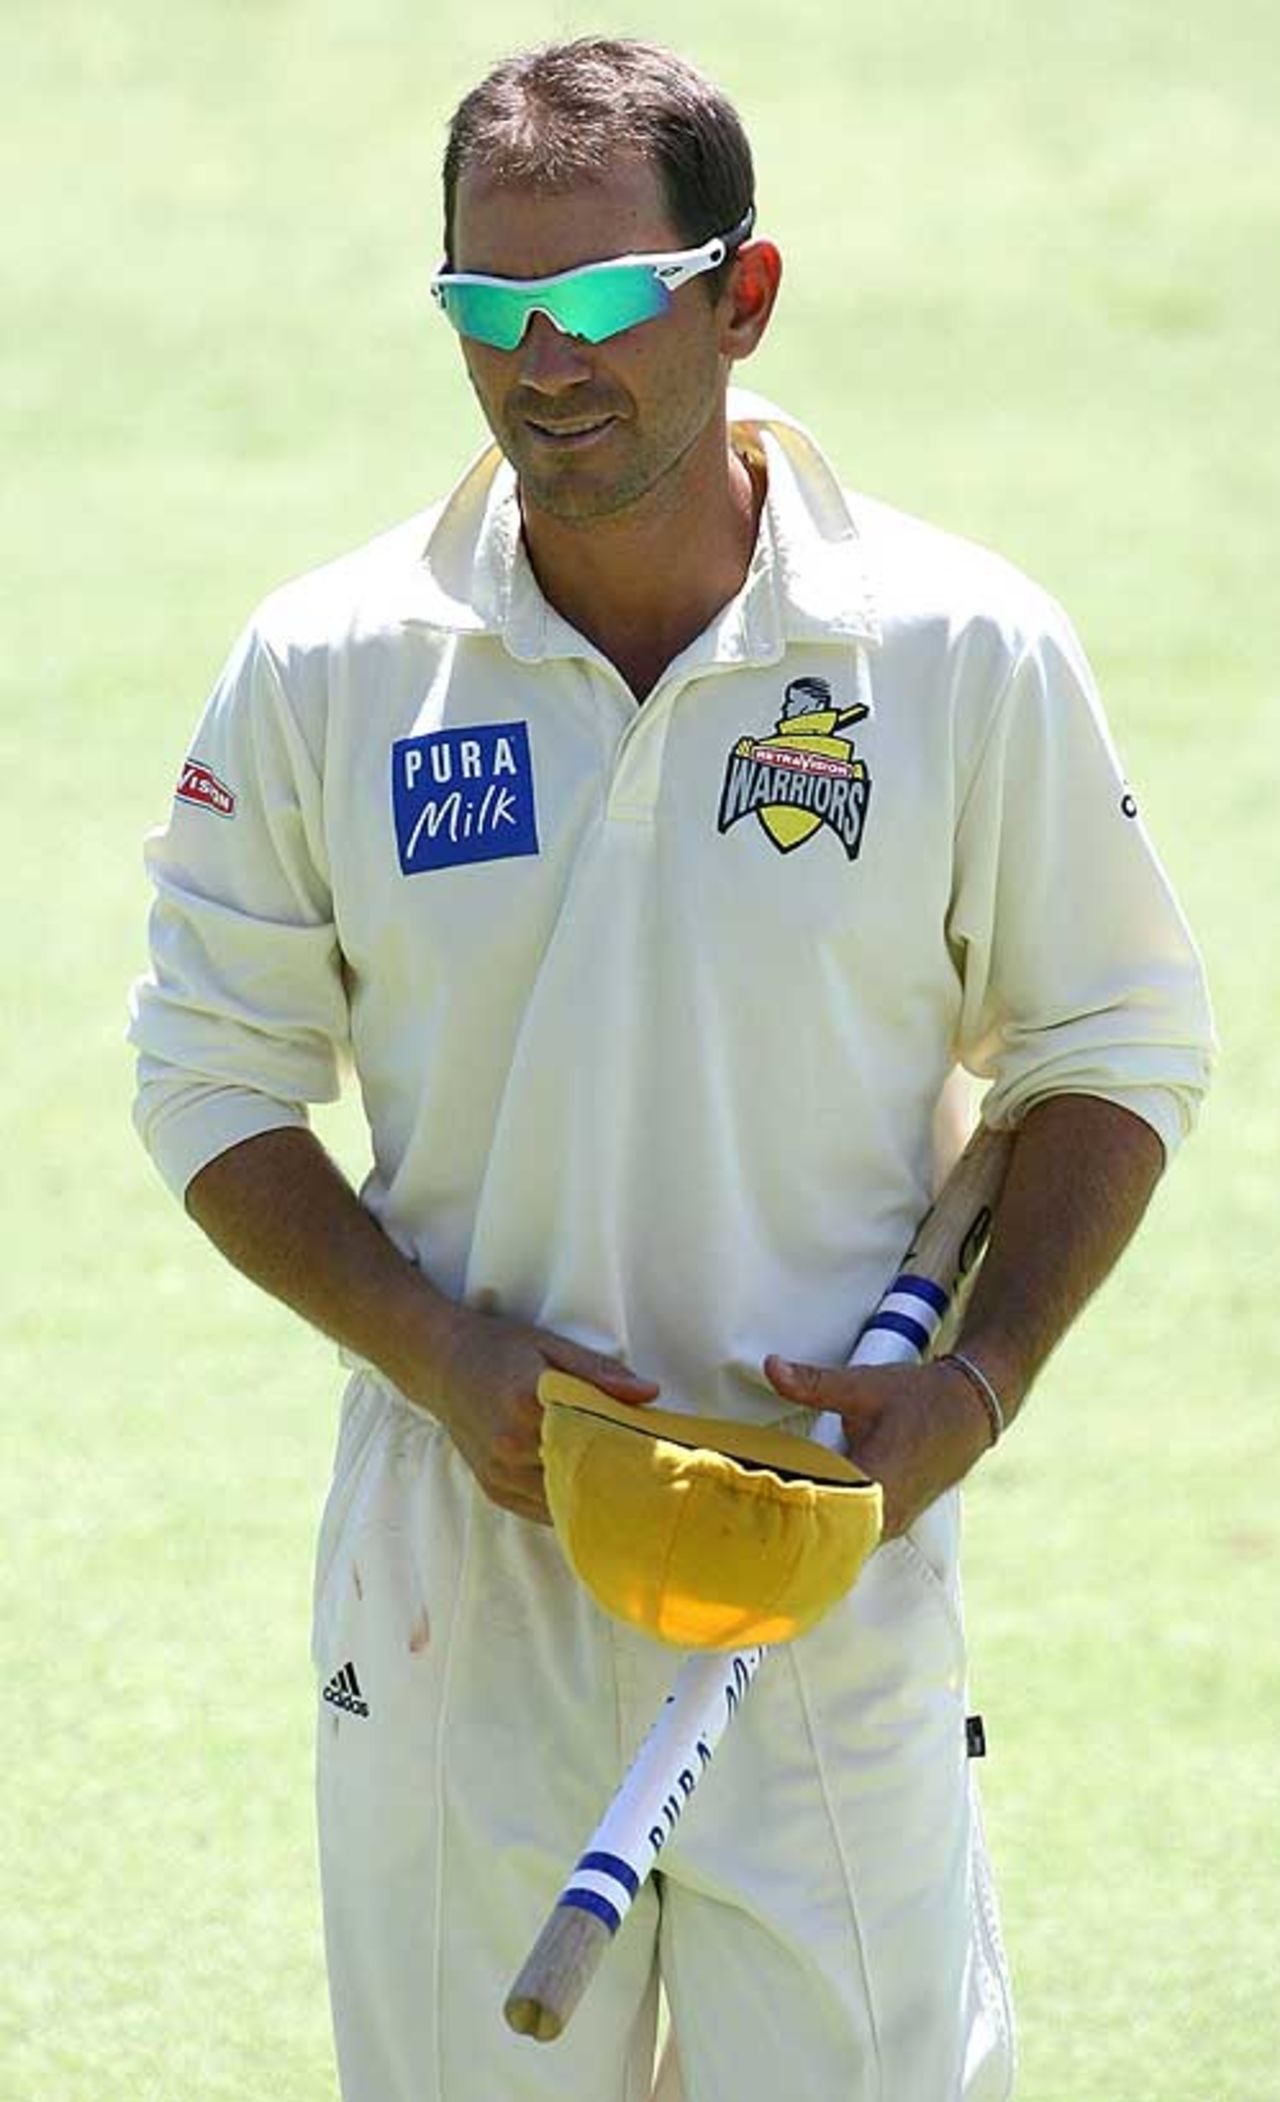 Justin Langer takes a memento after his final first-class appearance for Western Australia , Western Australia v Tasmania, Pura Cup, Perth, 4th day, March 10, 2008 
